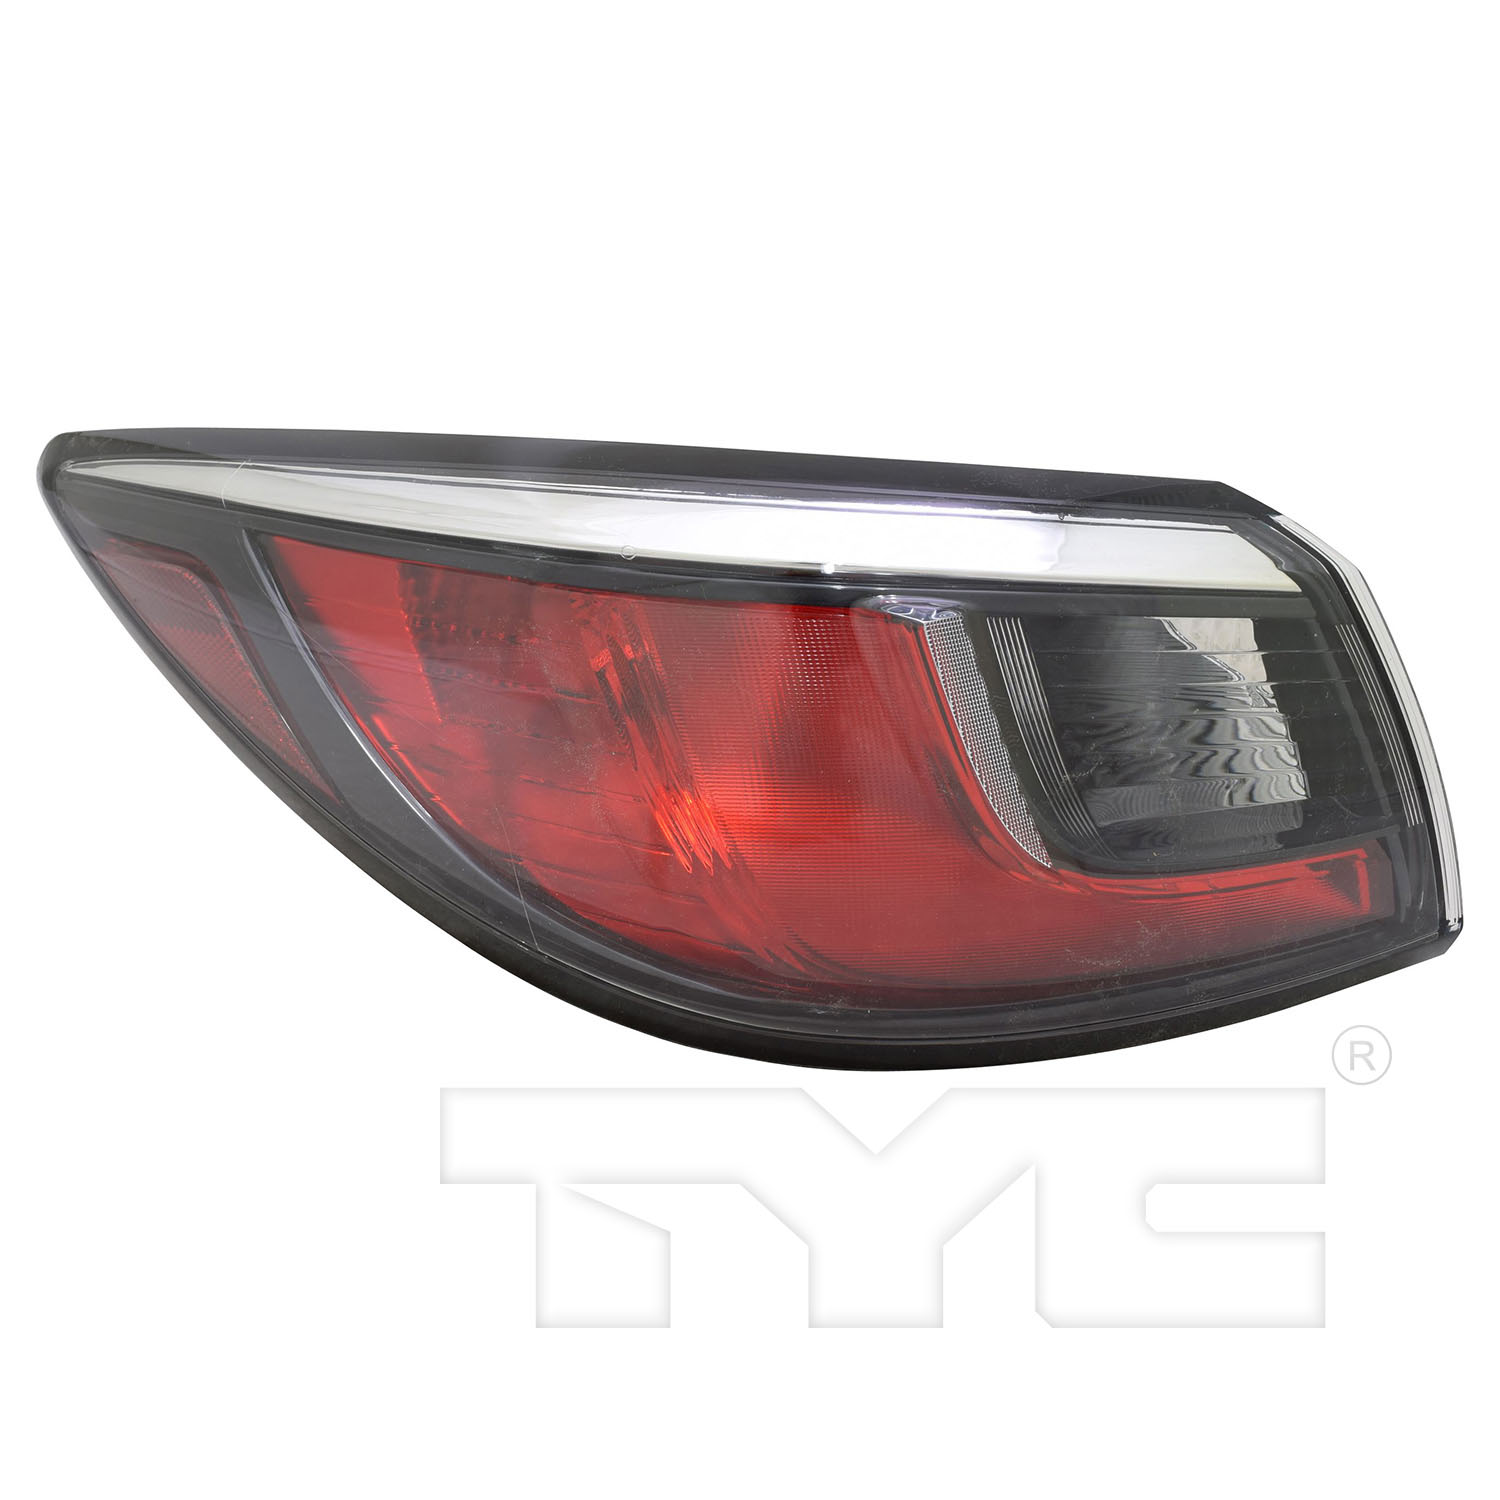 Aftermarket TAILLIGHTS for SCION - IA, iA,16-16,LT Taillamp assy outer